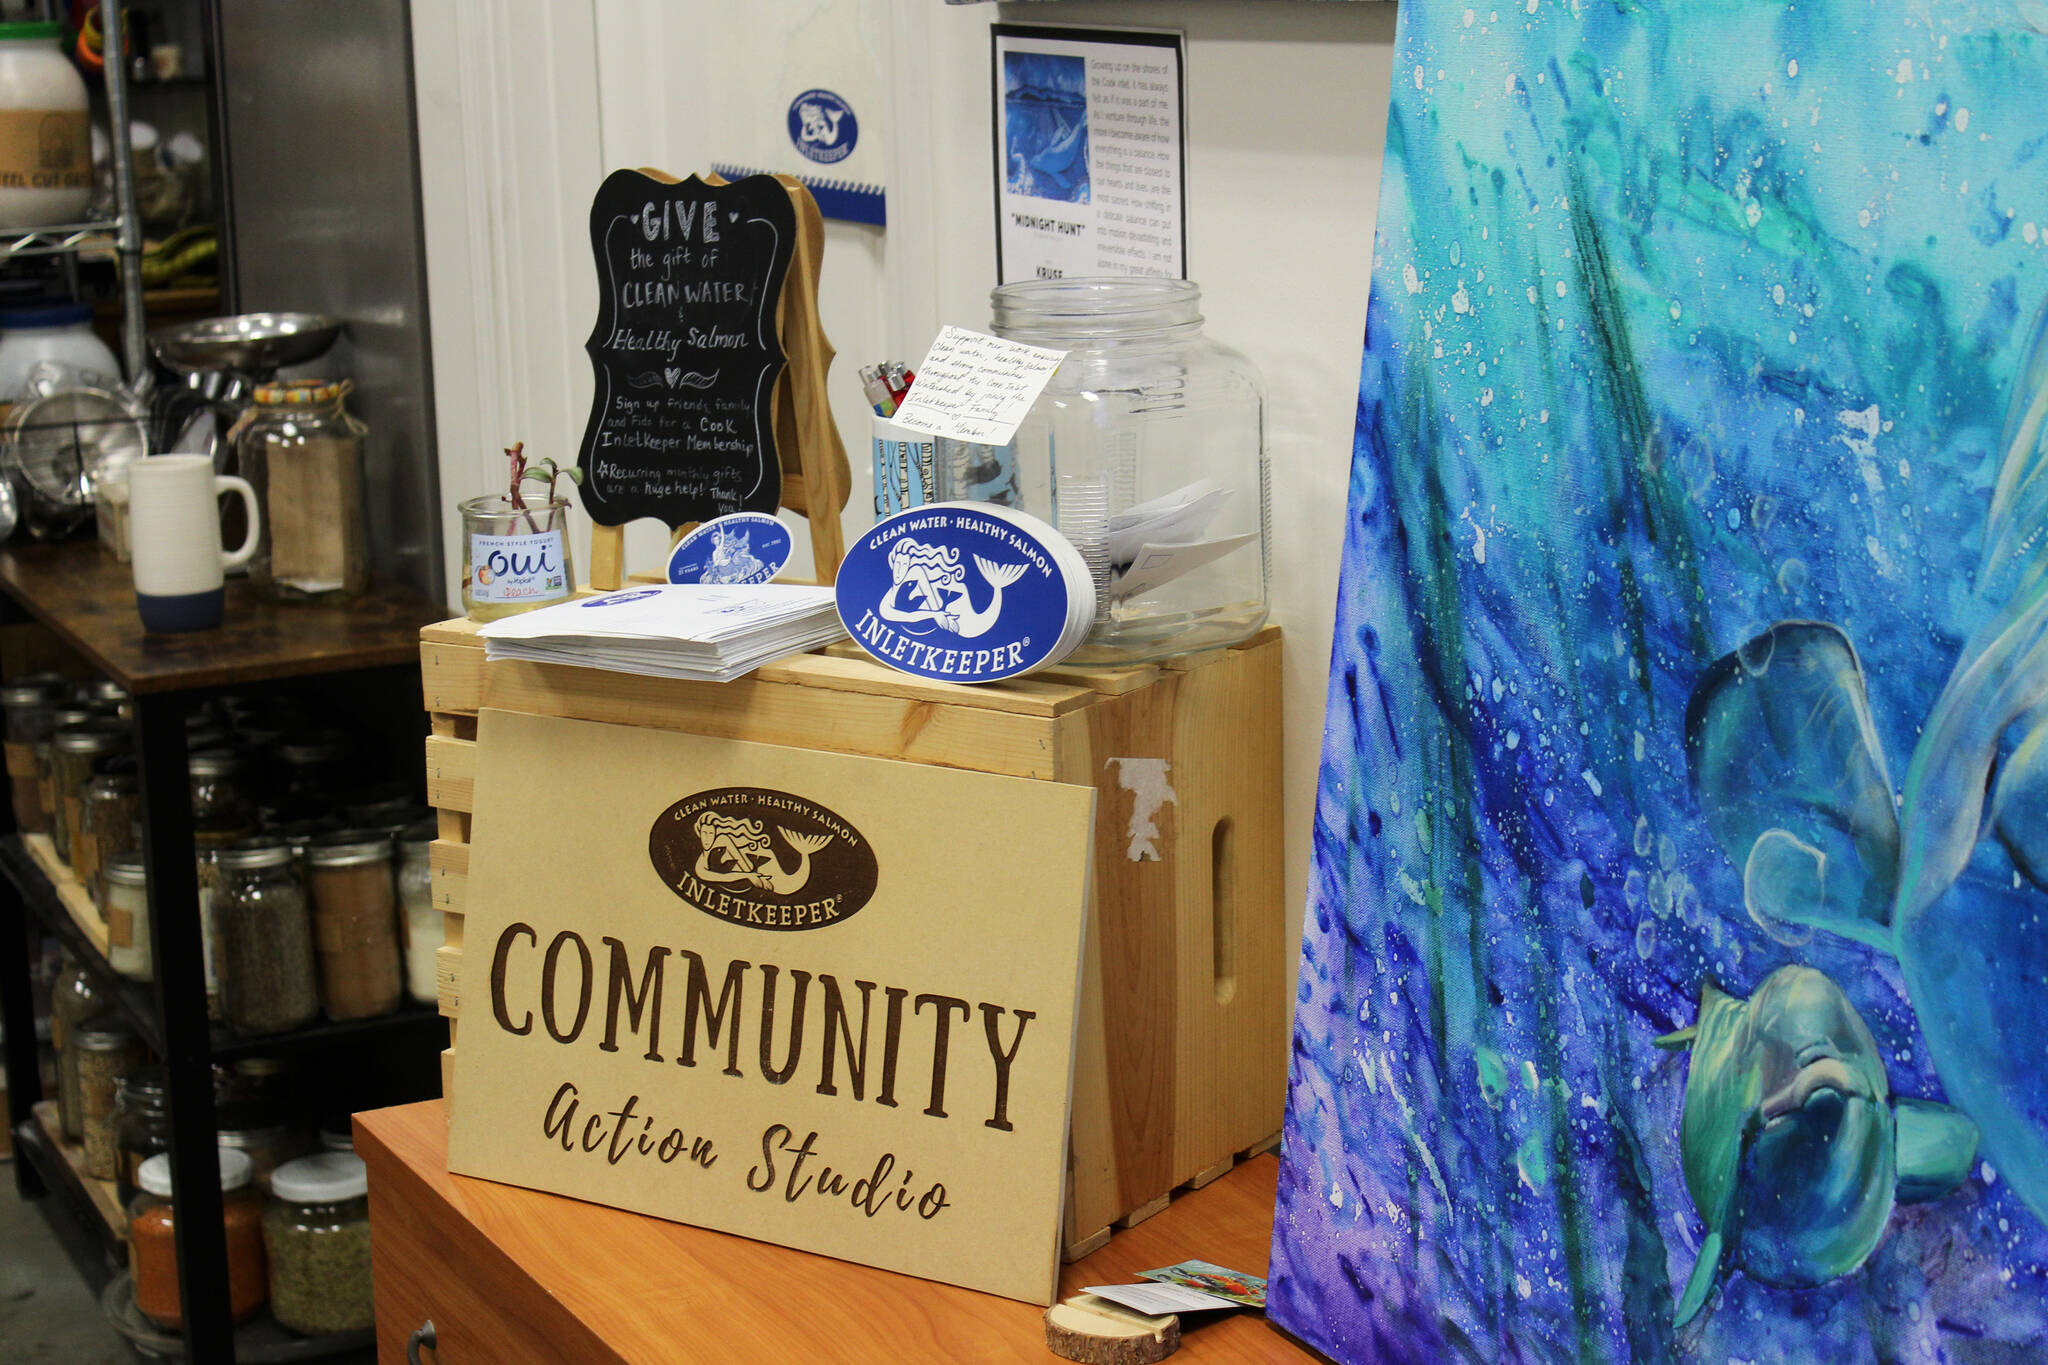 Informatin about Cook Inletkeeper is displayed next to artwork for sale as part of the “ART Sale 258” at the Cook Inletkeeper Community Action Studio on Thursday, Dec. 9, 2021 in Soldotna, Alaska. (Ashlyn O’Hara/Peninsula Clarion)